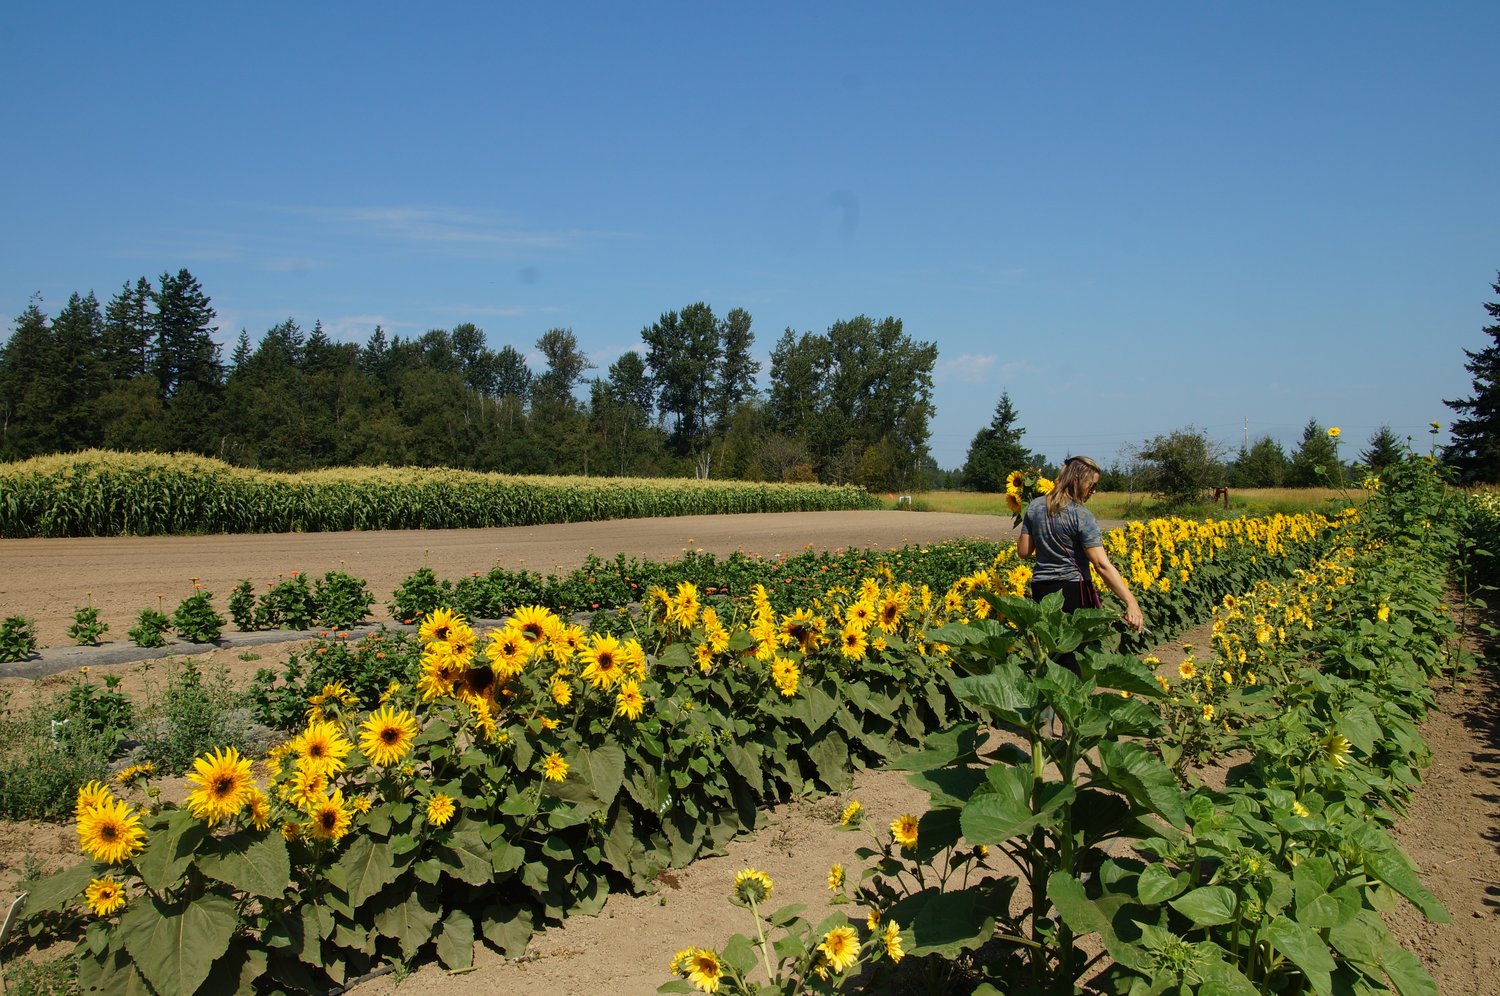 Home Farm U-Pick & Events co-owner Bridgette DiMonda picks sunflowers for a bouquet at her Kickerville Road farm. The family farm offers a year-round farm stand with fresh produce and fruit, as well as weekend summer markets with artisan vendors from across Washington.